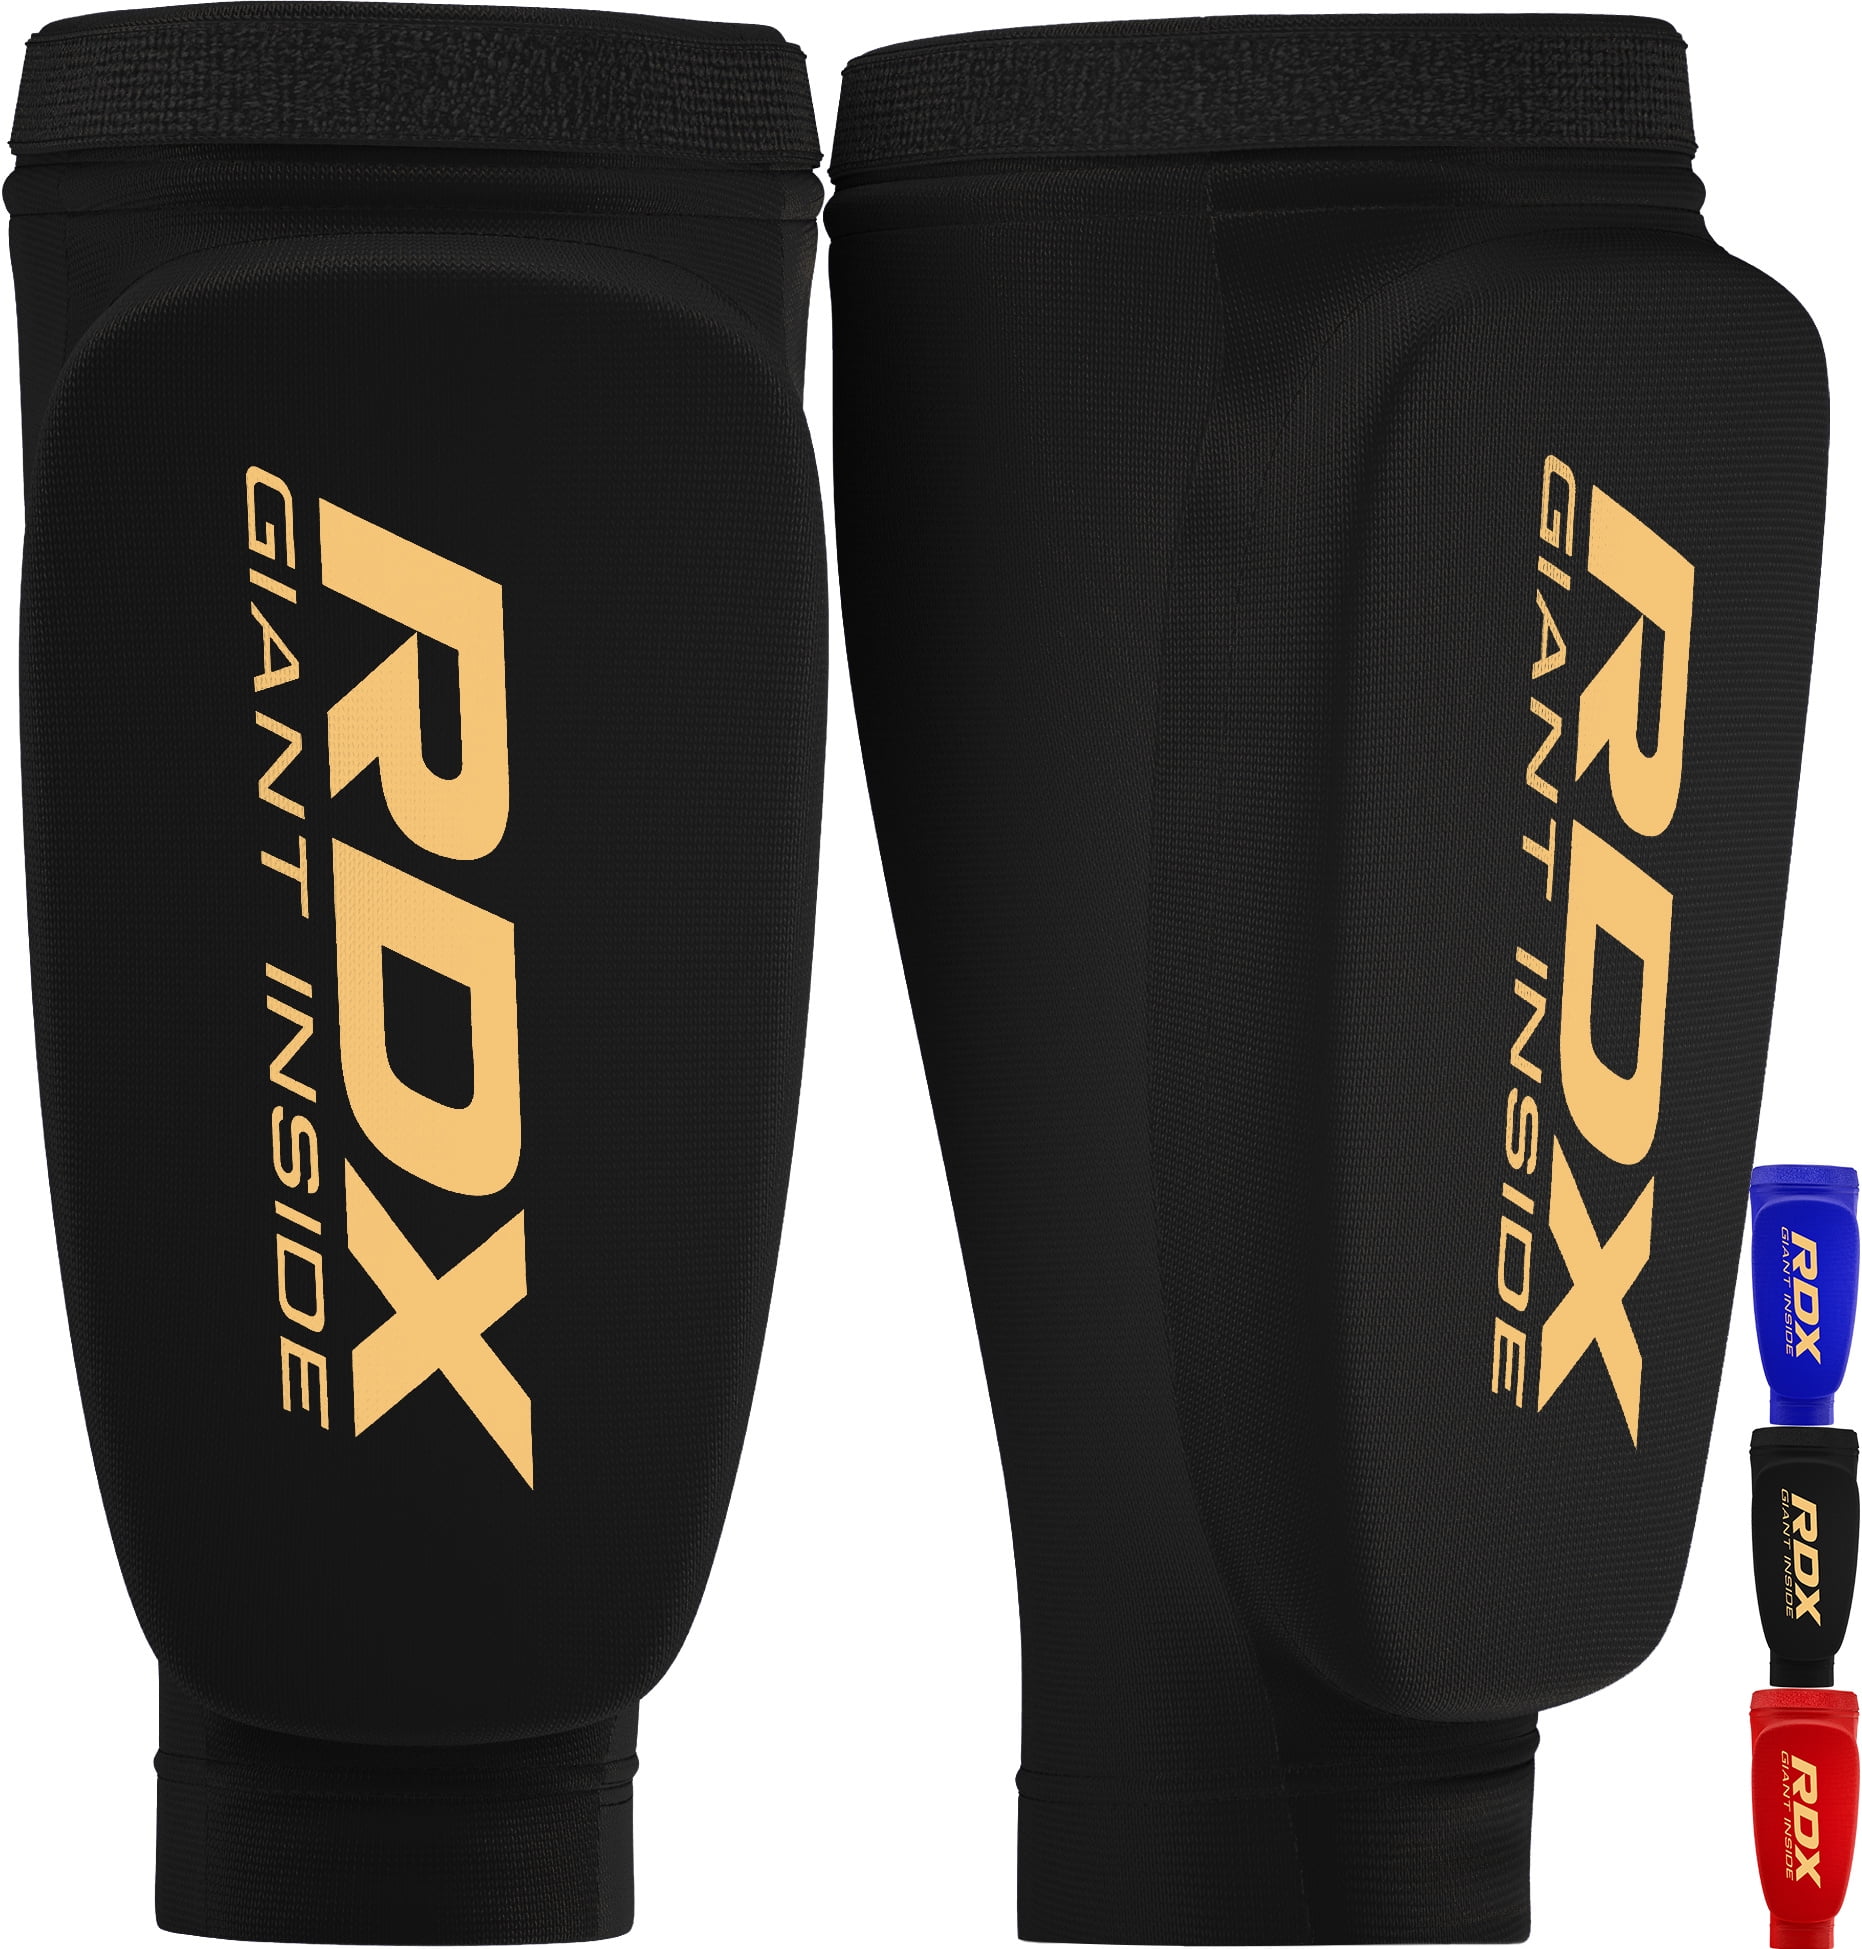 RDX Knee Caps Adult Protector Brace Support Guards Work Wear Guard MMA W 